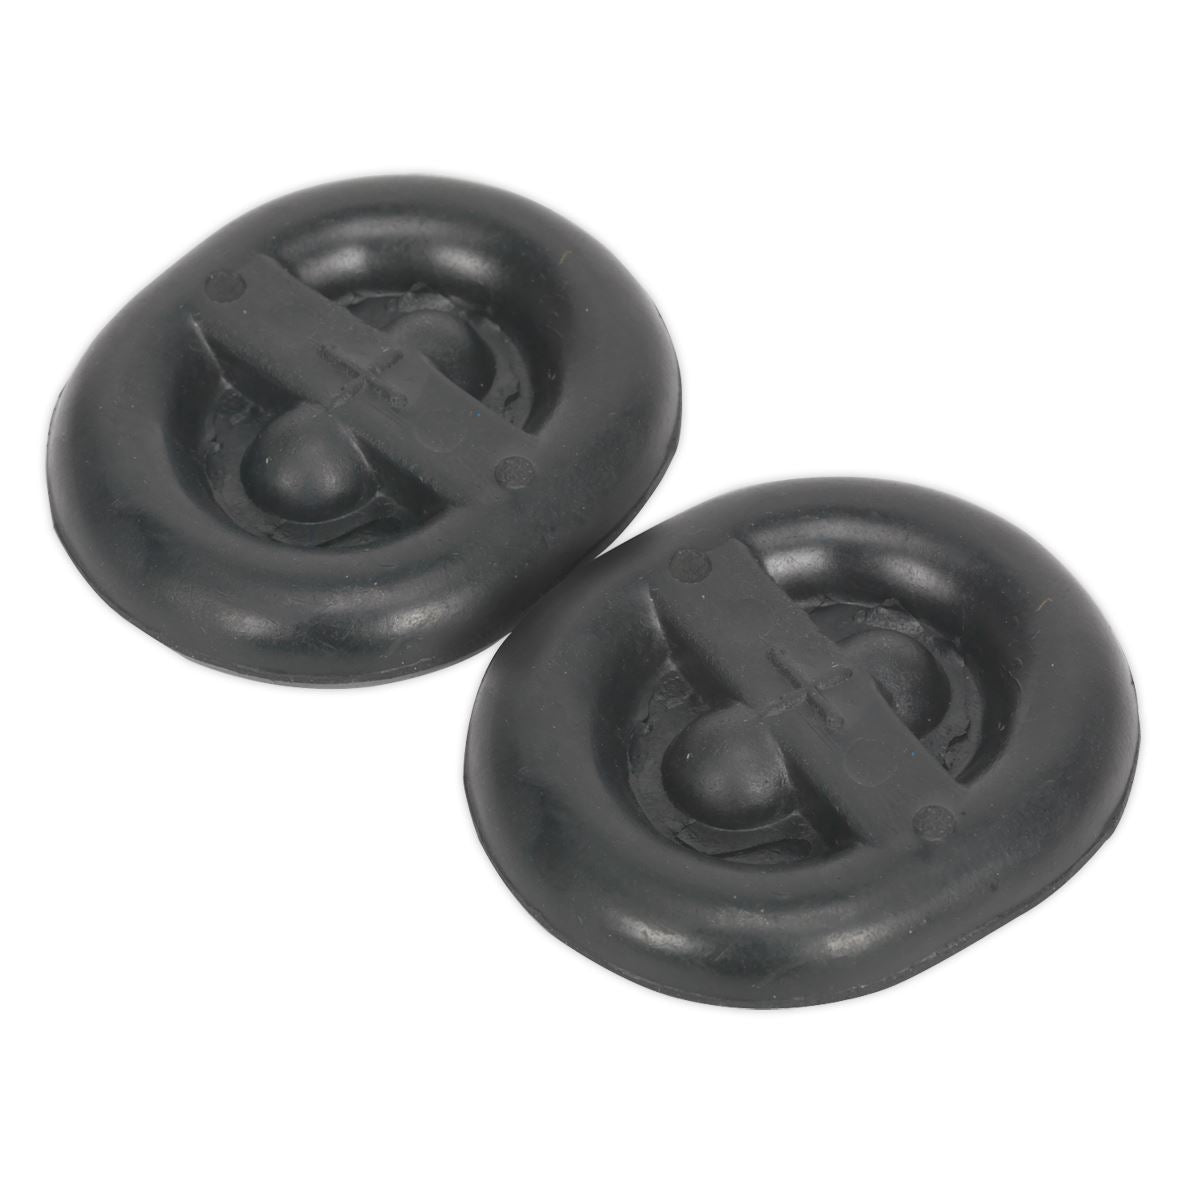 Sealey Exhaust Mounting Rubbers - L62 x D54 x H13.5 (Pack of 2)